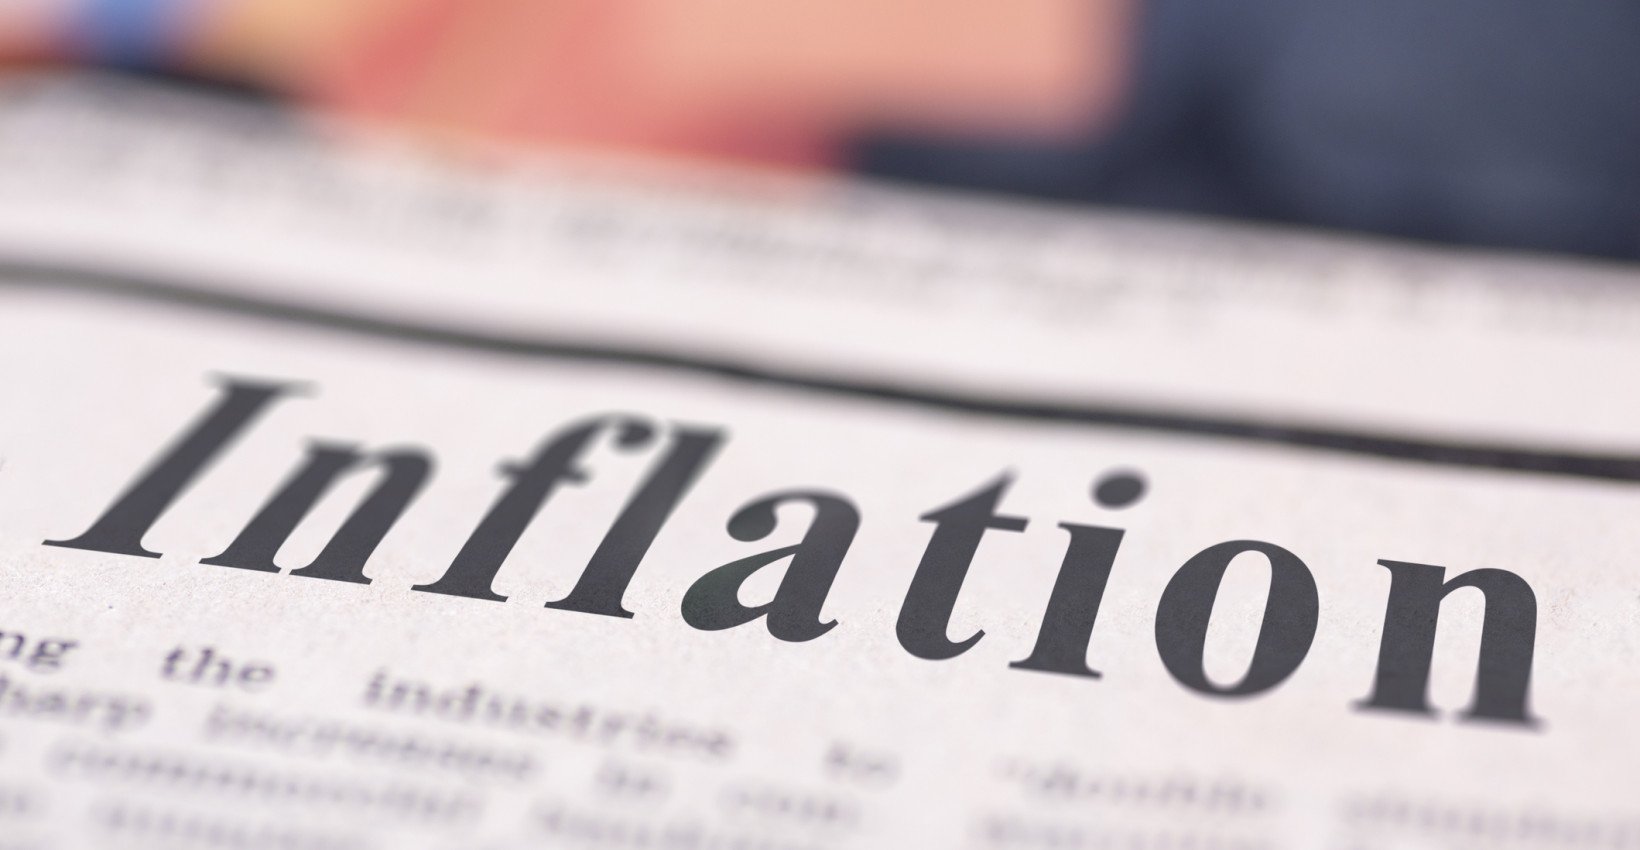 A newspaper with the headline "Inflation"